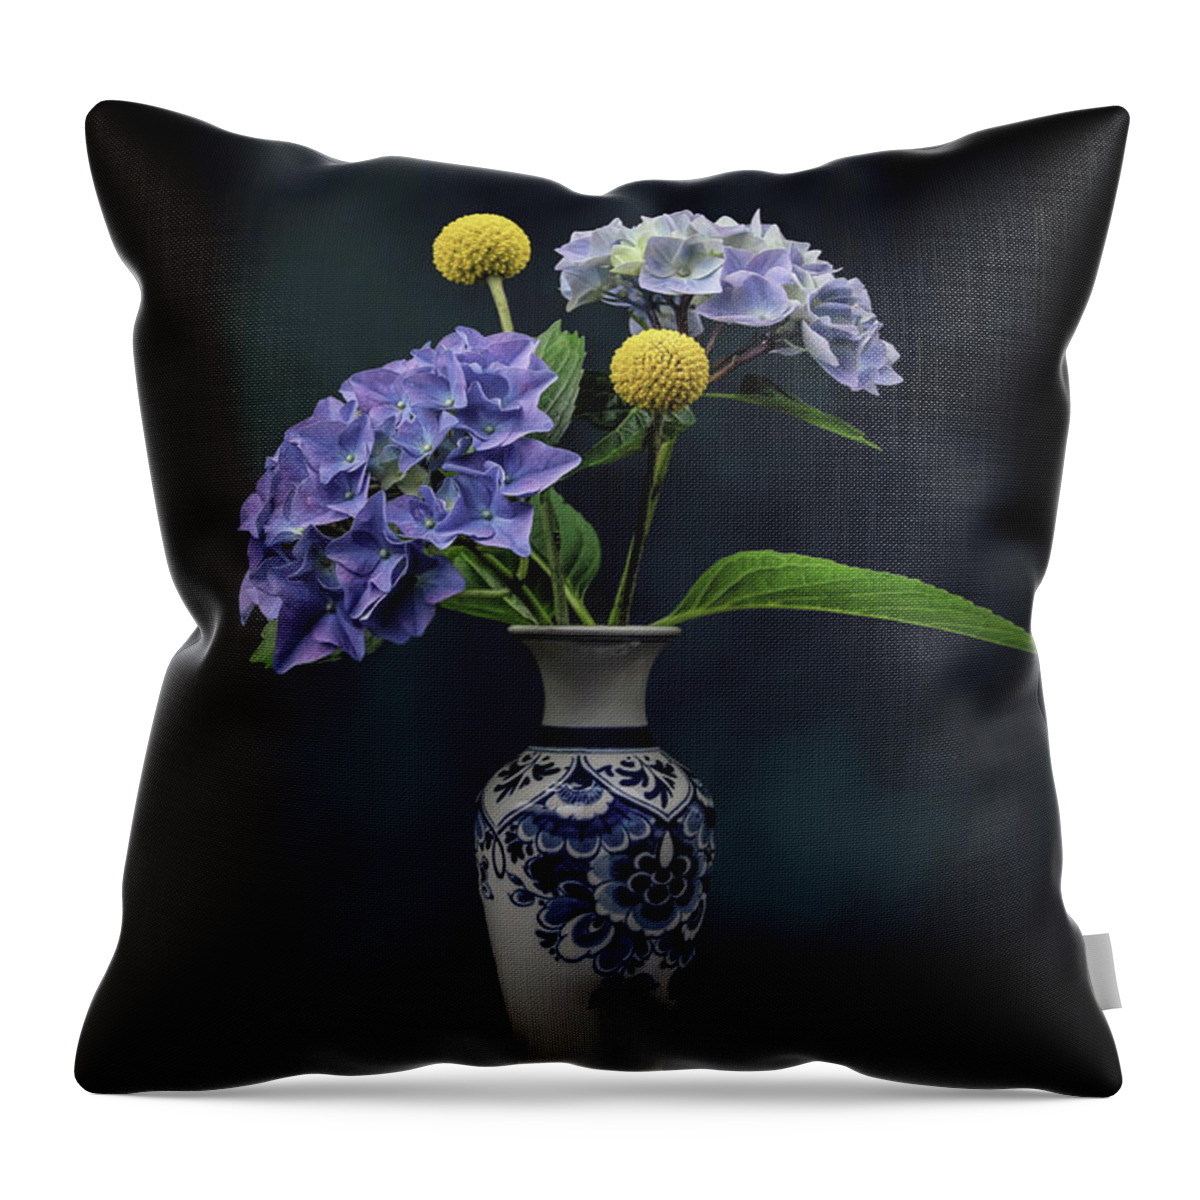 Still Life Throw Pillow featuring the digital art Still life blue and yellow by Marjolein Van Middelkoop